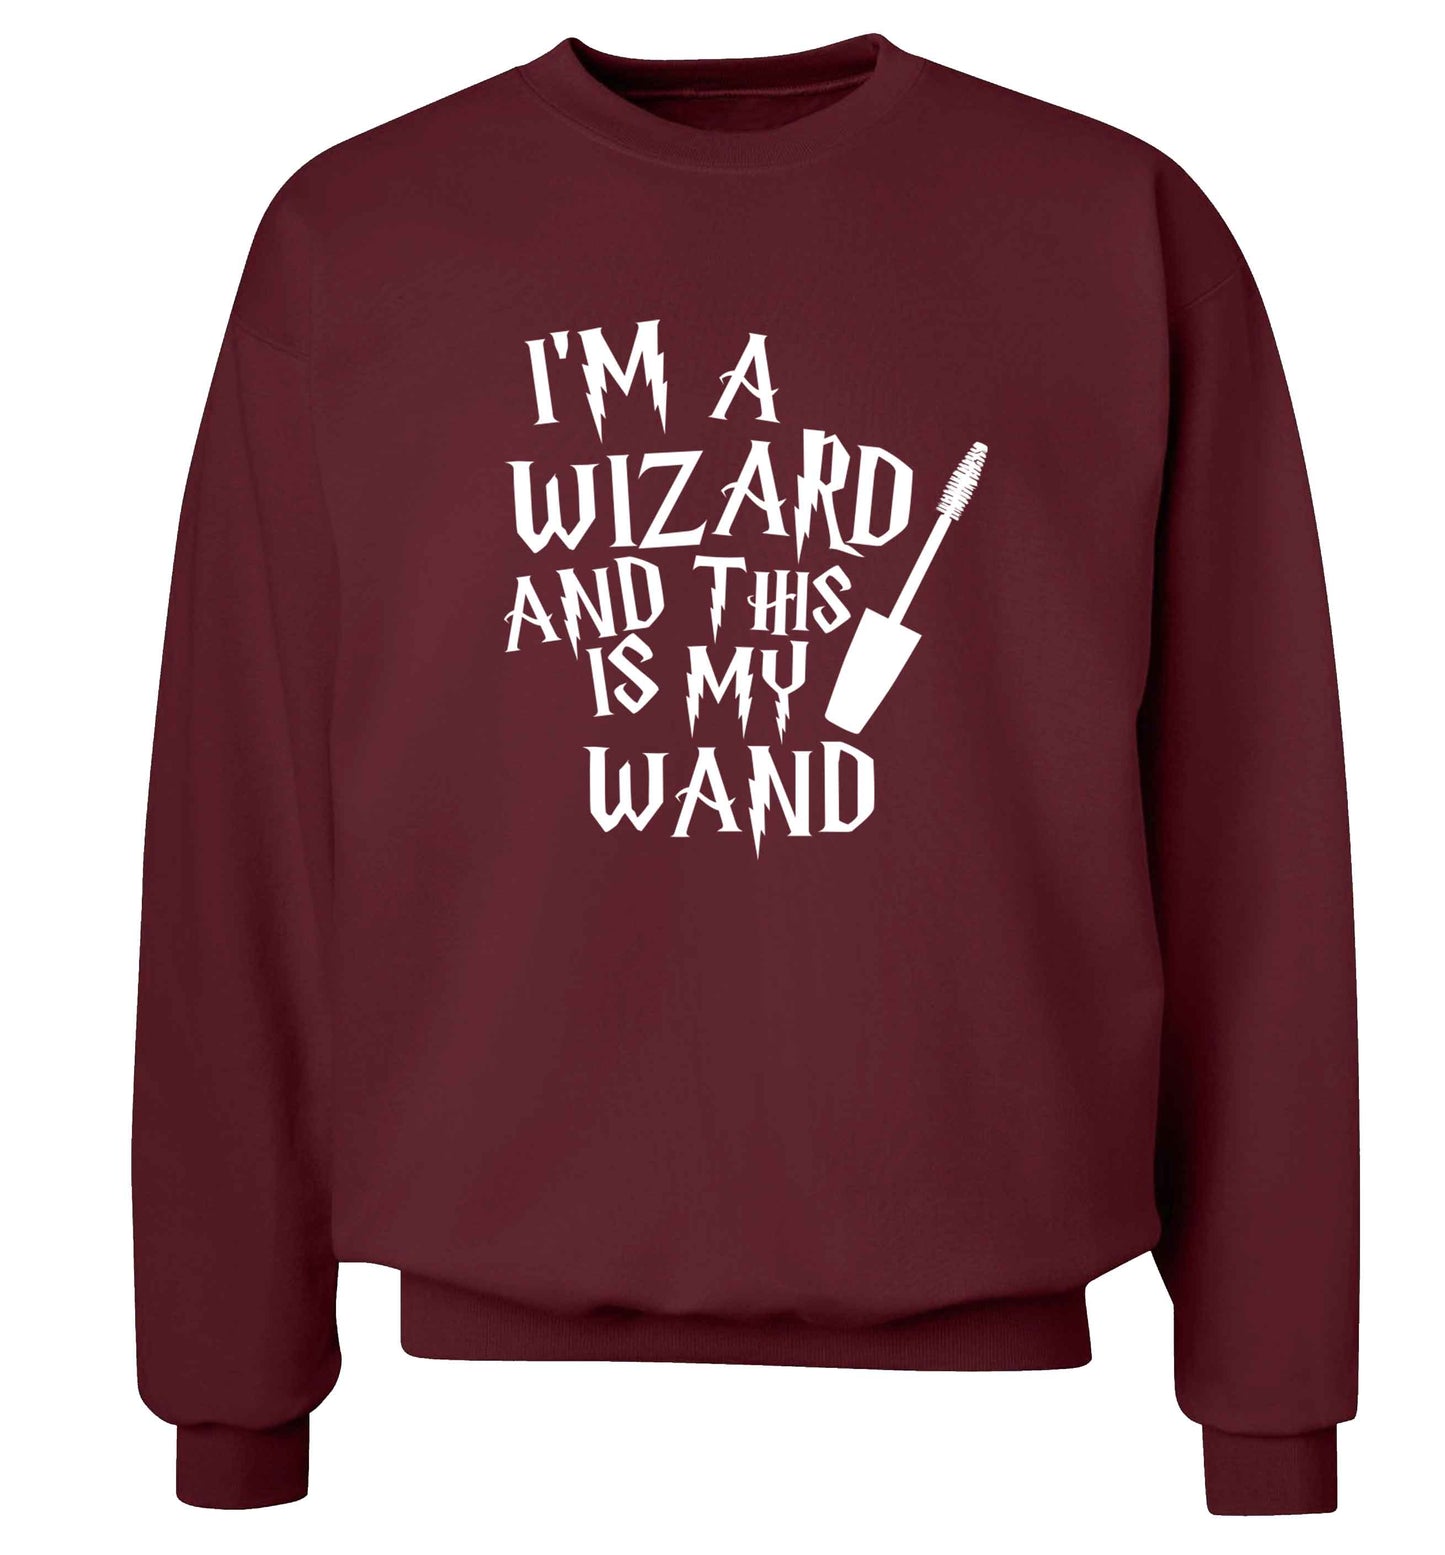 I'm a wizard and this is my wand Adult's unisex maroon Sweater 2XL